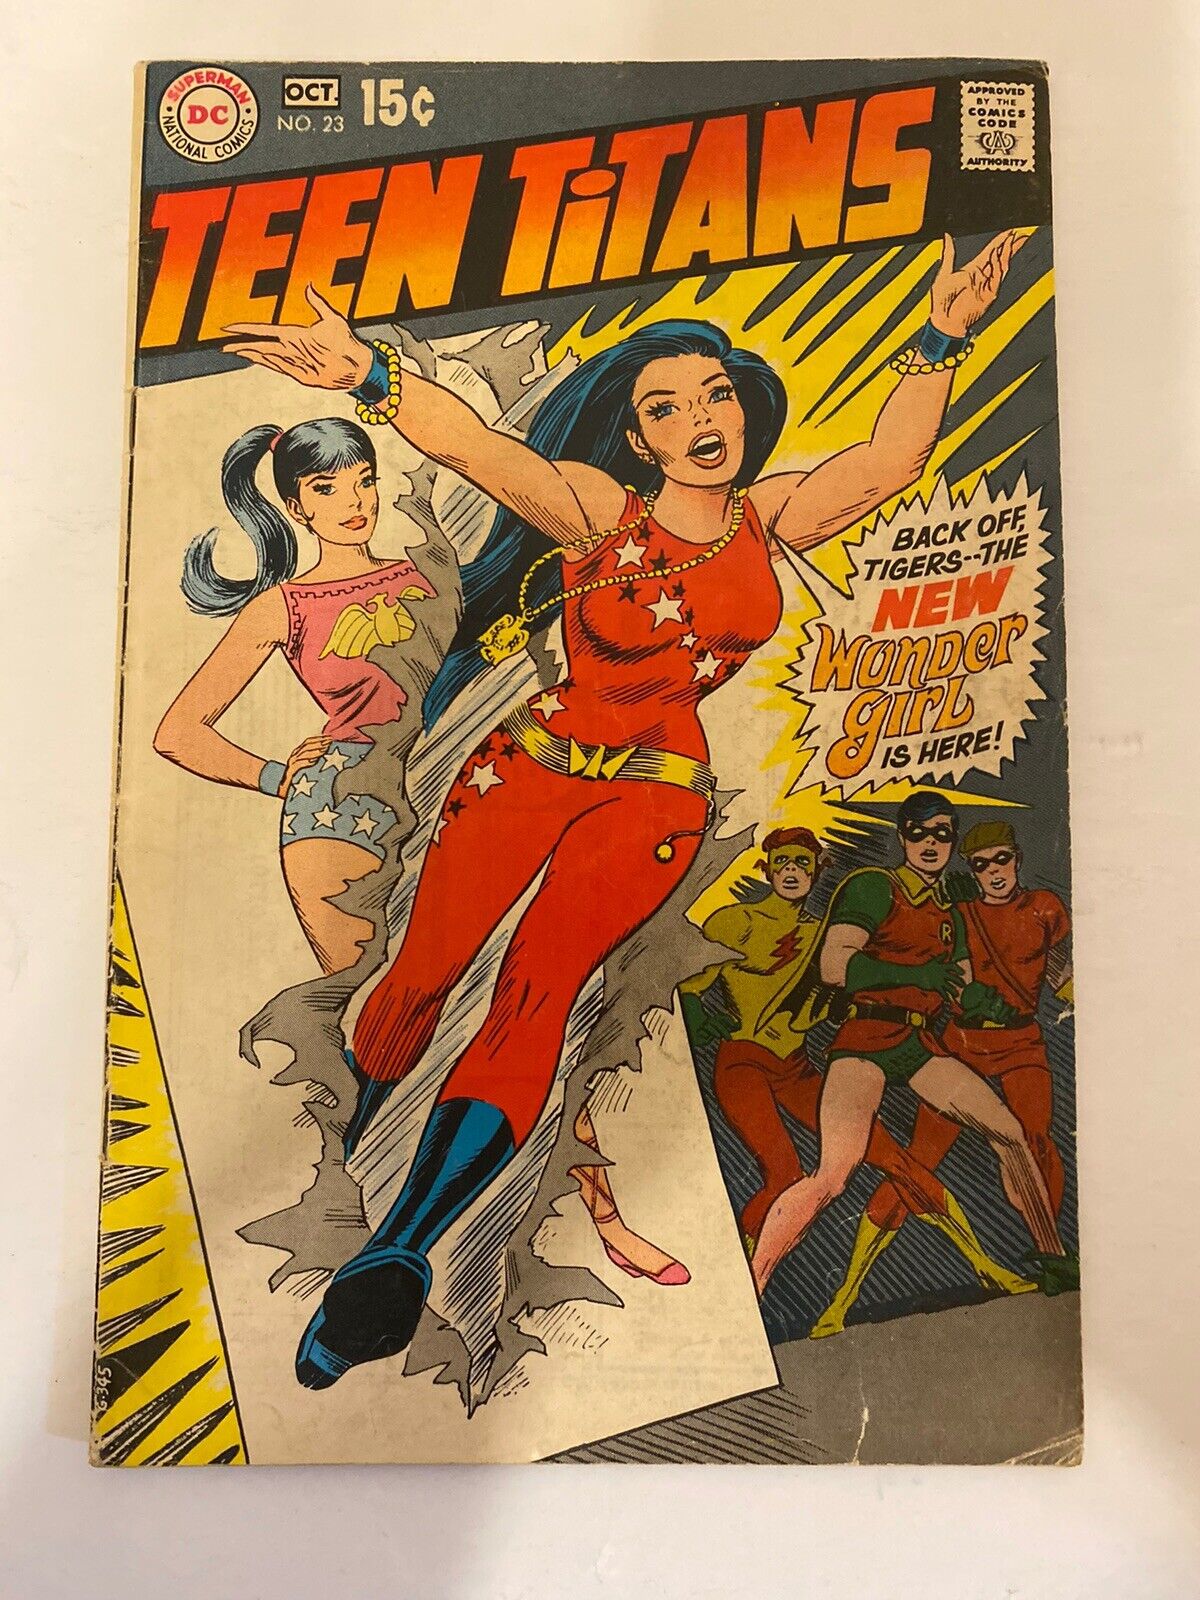 TEEN TITANS #23- Silver Age DC, NEW WONDER GIRL costume